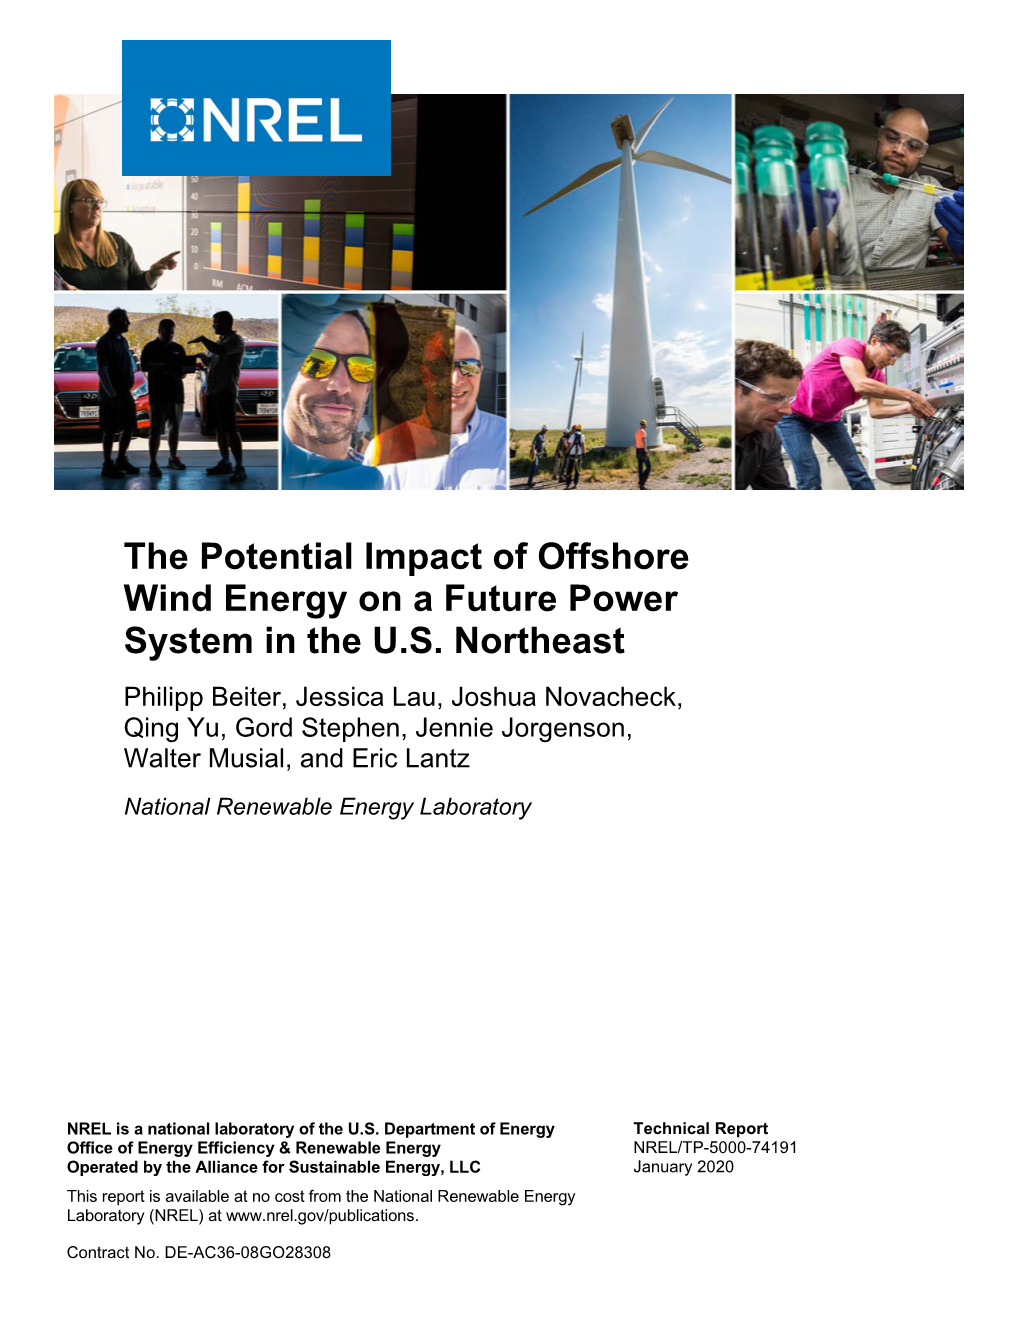 The Potential Impact of Offshore Wind Energy on a Future Power System in the U.S